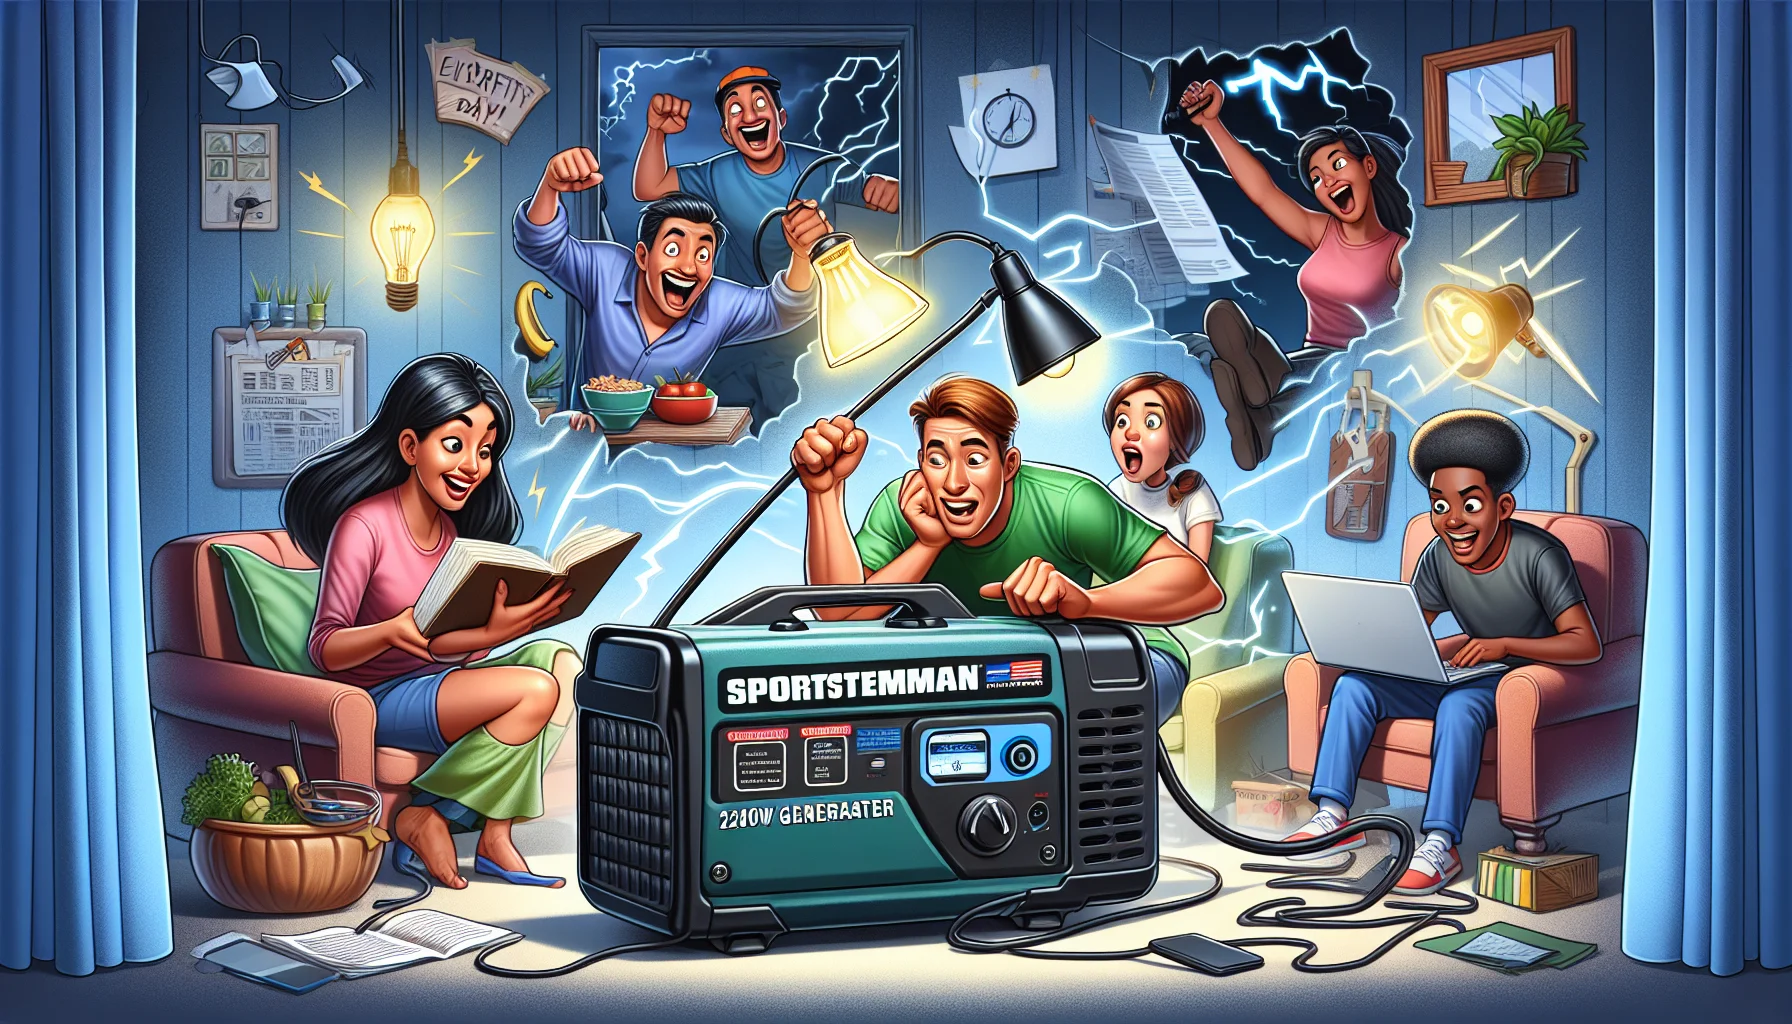 Create a playful and imaginative scene where a Sportsman 2200W Generator gets all the attention in an everyday setting that's been given a comic twist. Suddenly, there's a power outage and a sensible South Asian woman, a witty Caucasian man, and a smart Black teenager appear impressed by the generator's ability to electrify their day, defying the darkness. They're all actively partaking in different activities utilizing the generator - the woman is reading a book with a lamp, the man is working on his laptop, and the teenager is playing a video game, all of them lit up and functioning solely due to the generator's power. They realize the generator not only generates electricity, but also fun, laughter, and uninterrupted activities.